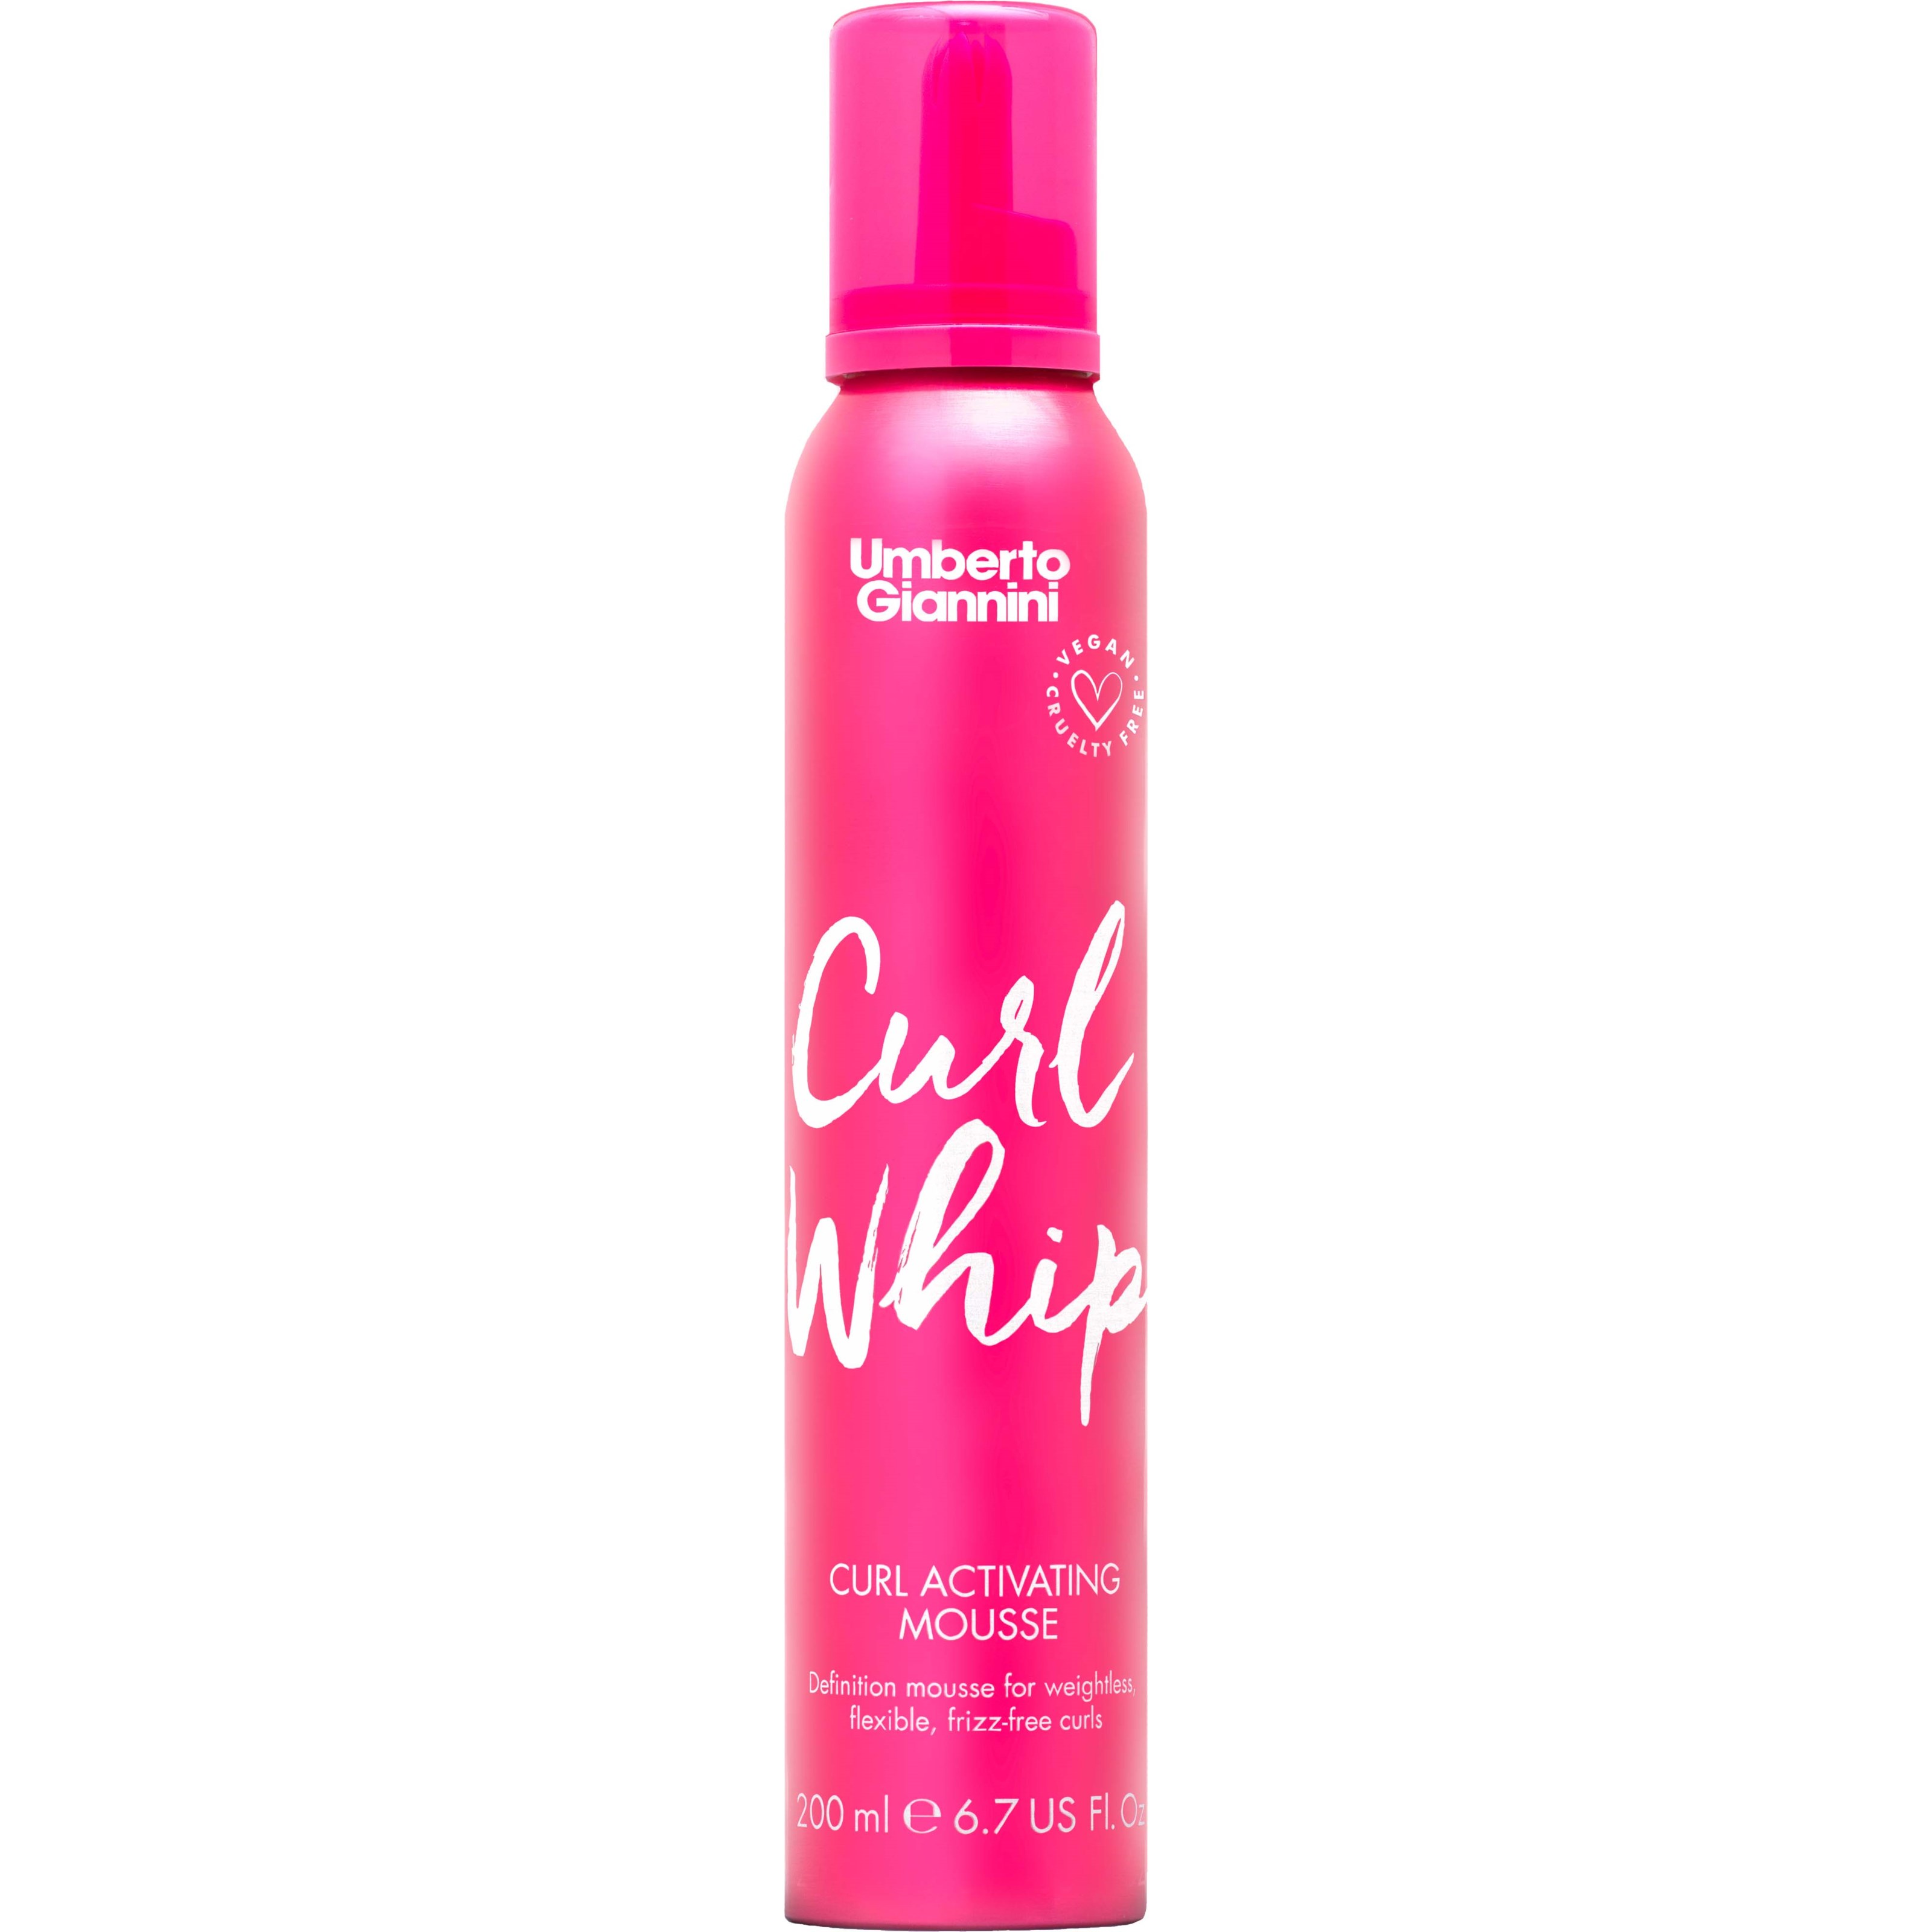 Umberto Giannini Curl Jelly Whip Activating Mousse 200 ml